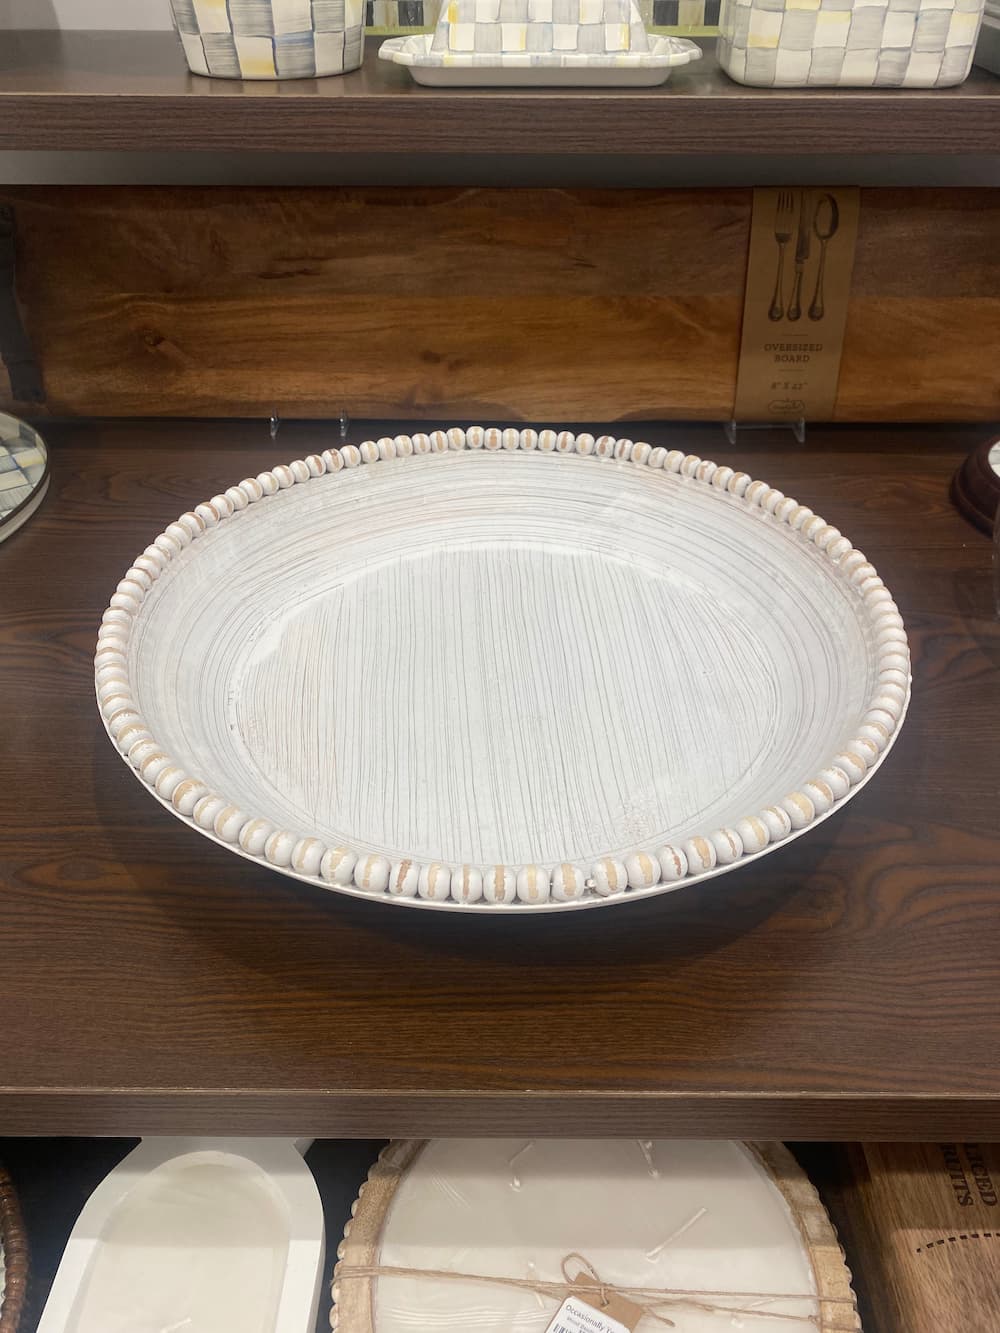 A large beaded bowl from Mud Pie.